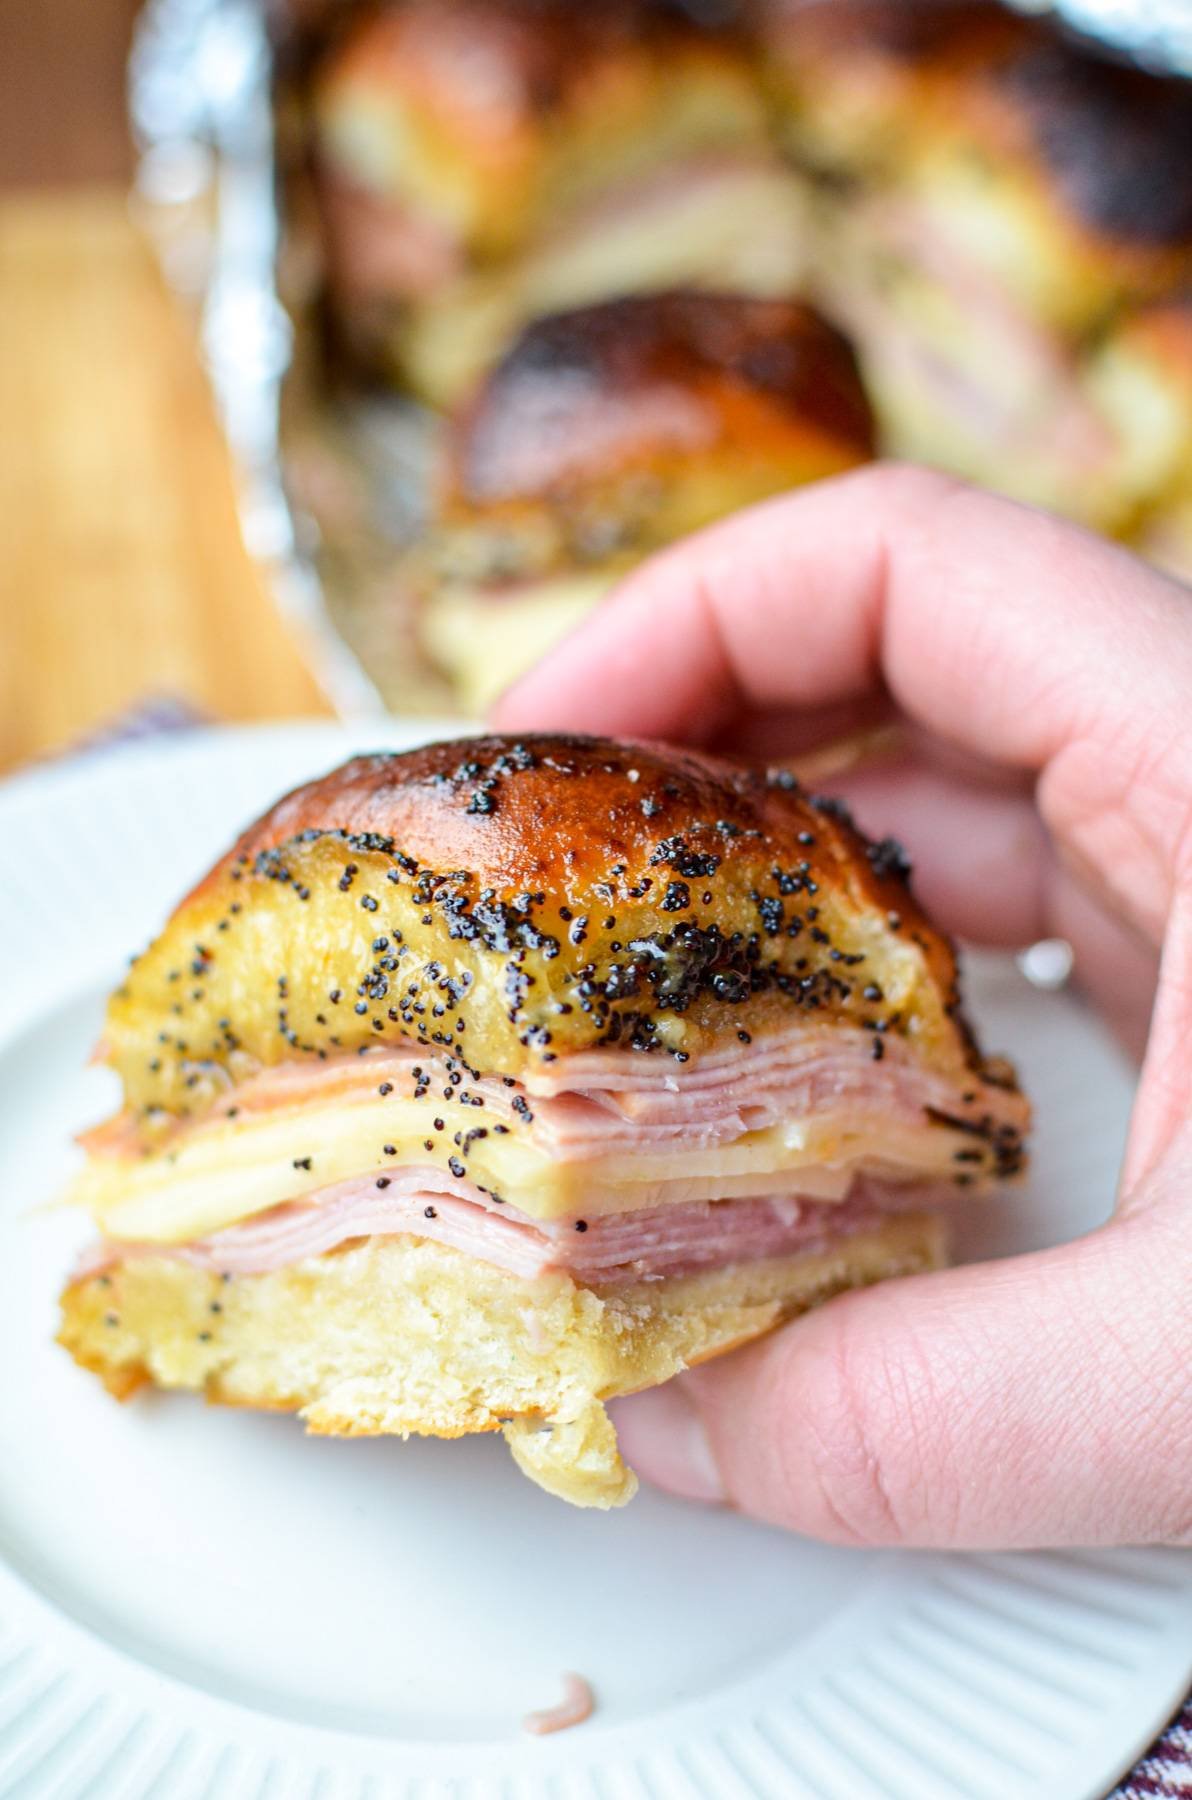 Holding a ham and cheese slider, covered with a poppy seed sauce.